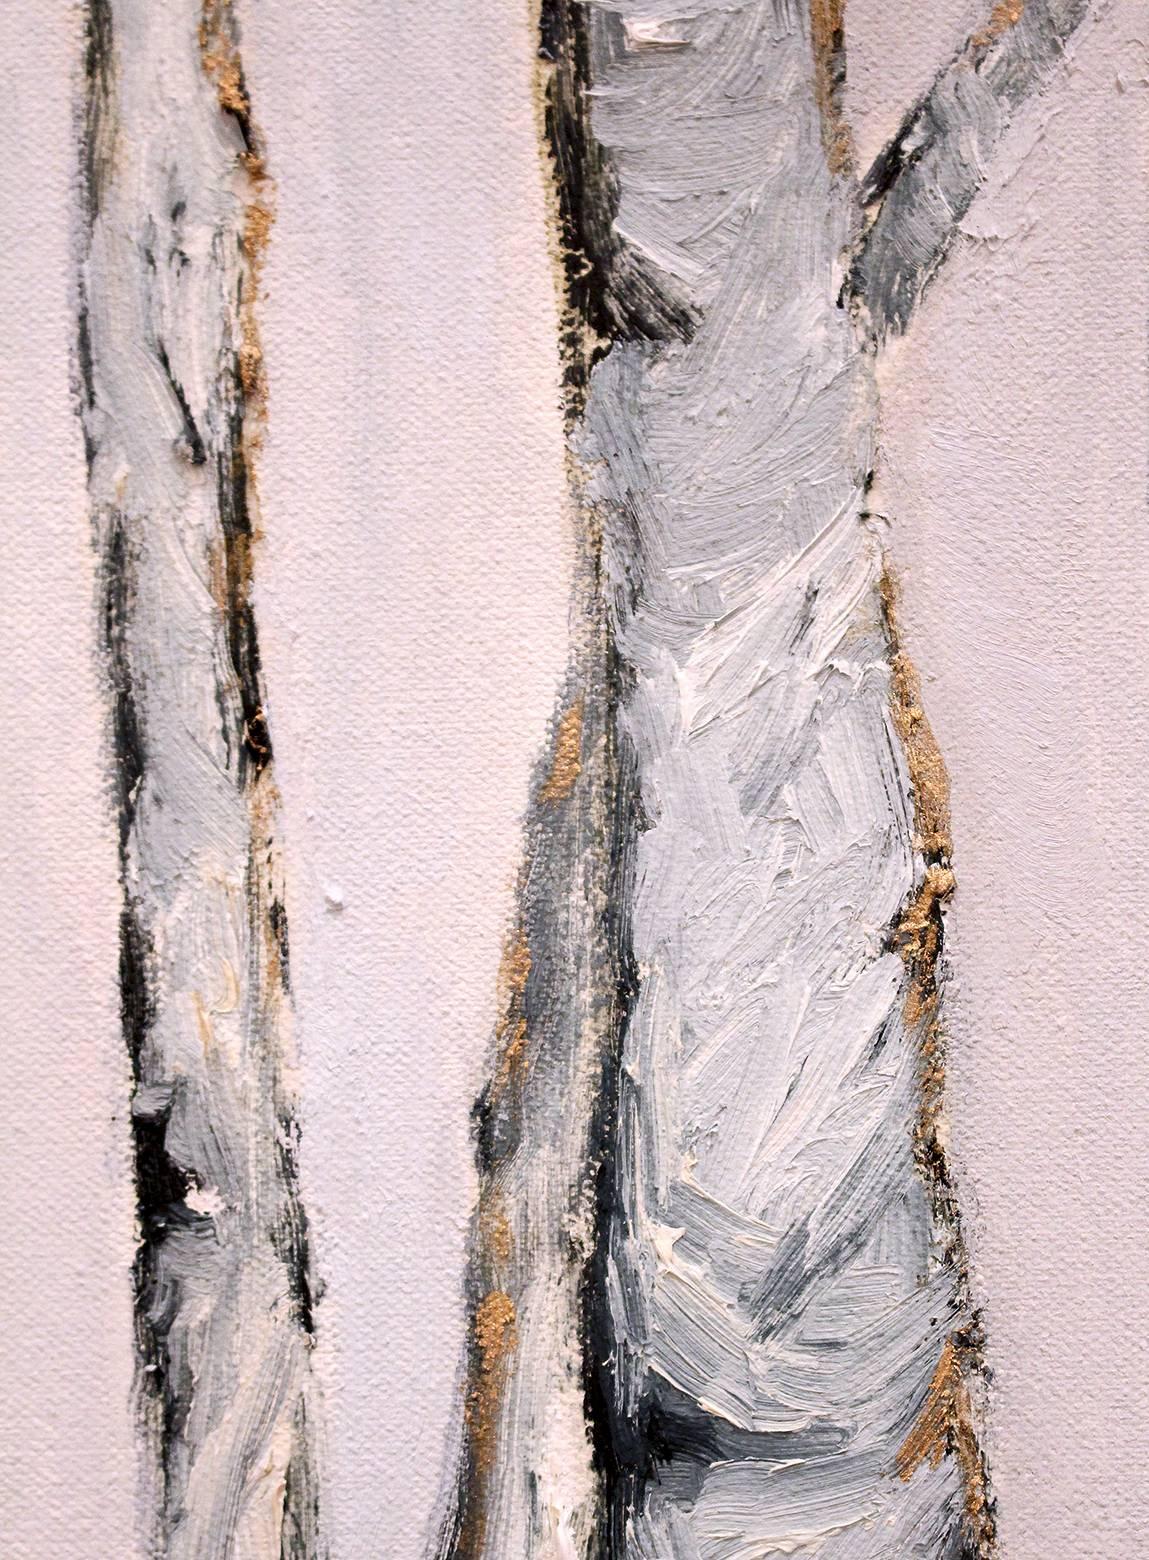 Stunning piece featuring winter birch trees from Andrea Harris.